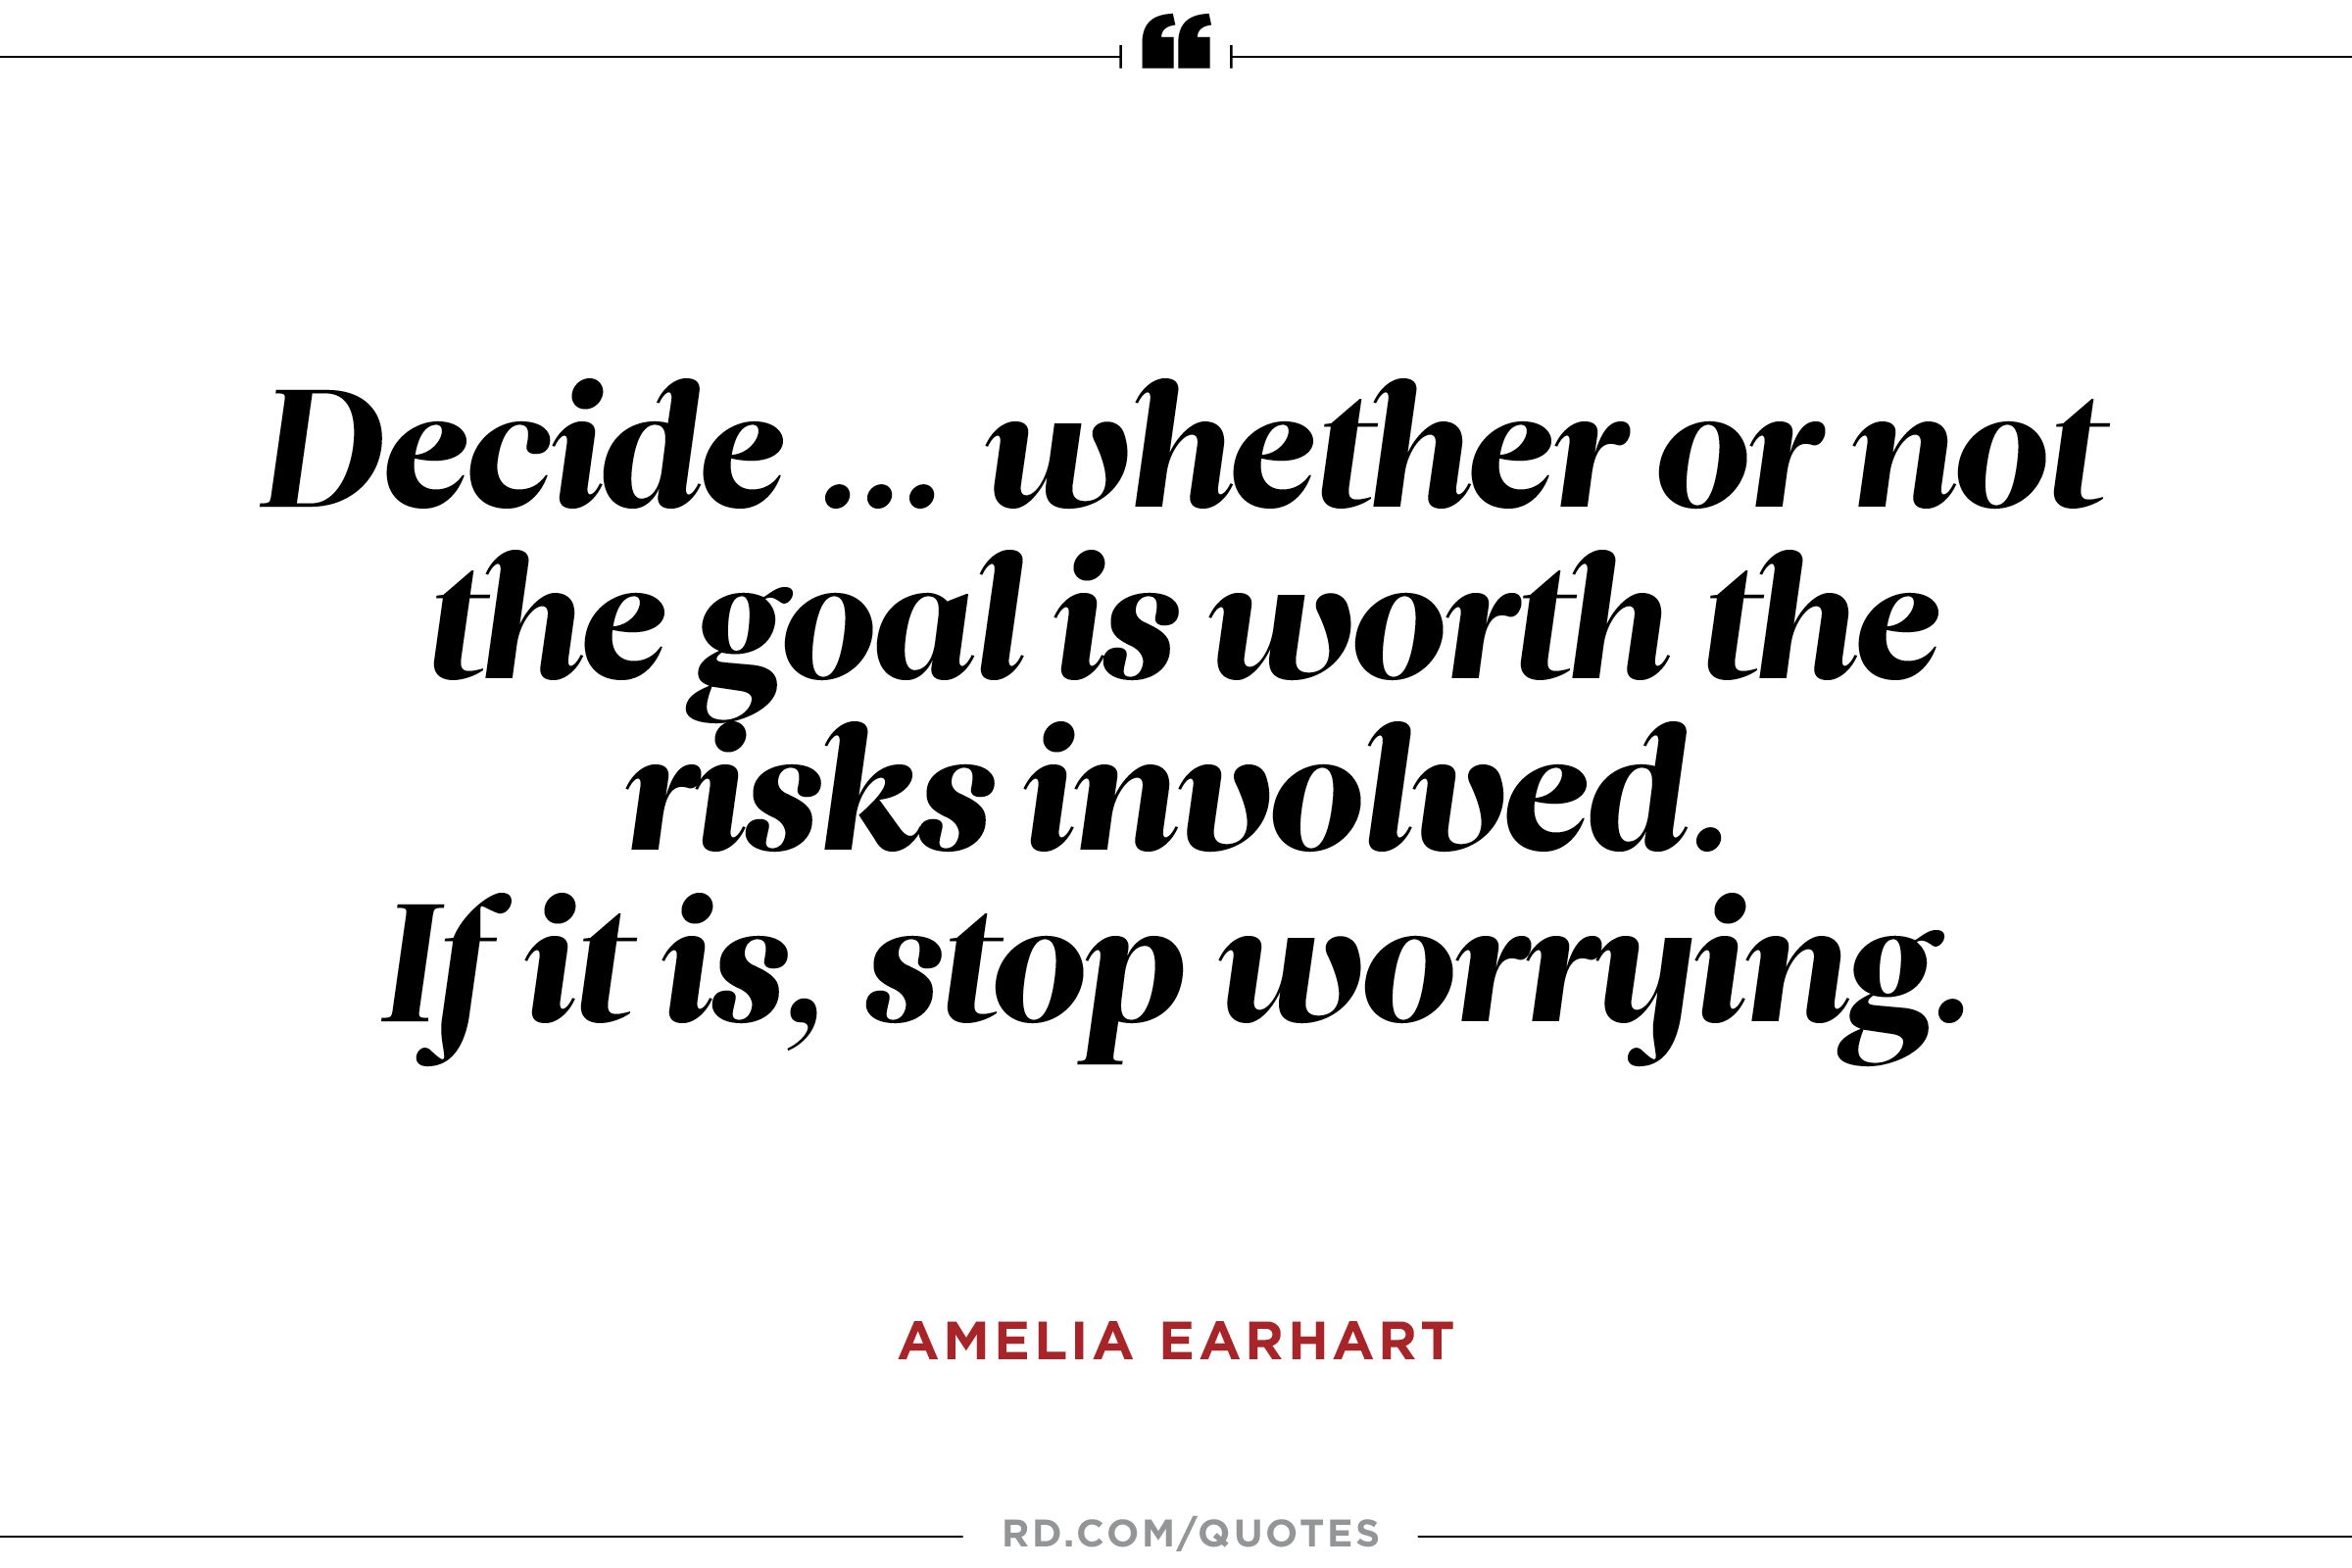 10 Amelia Earhart Quotes to Propel You to Greatness | Reader's Digest